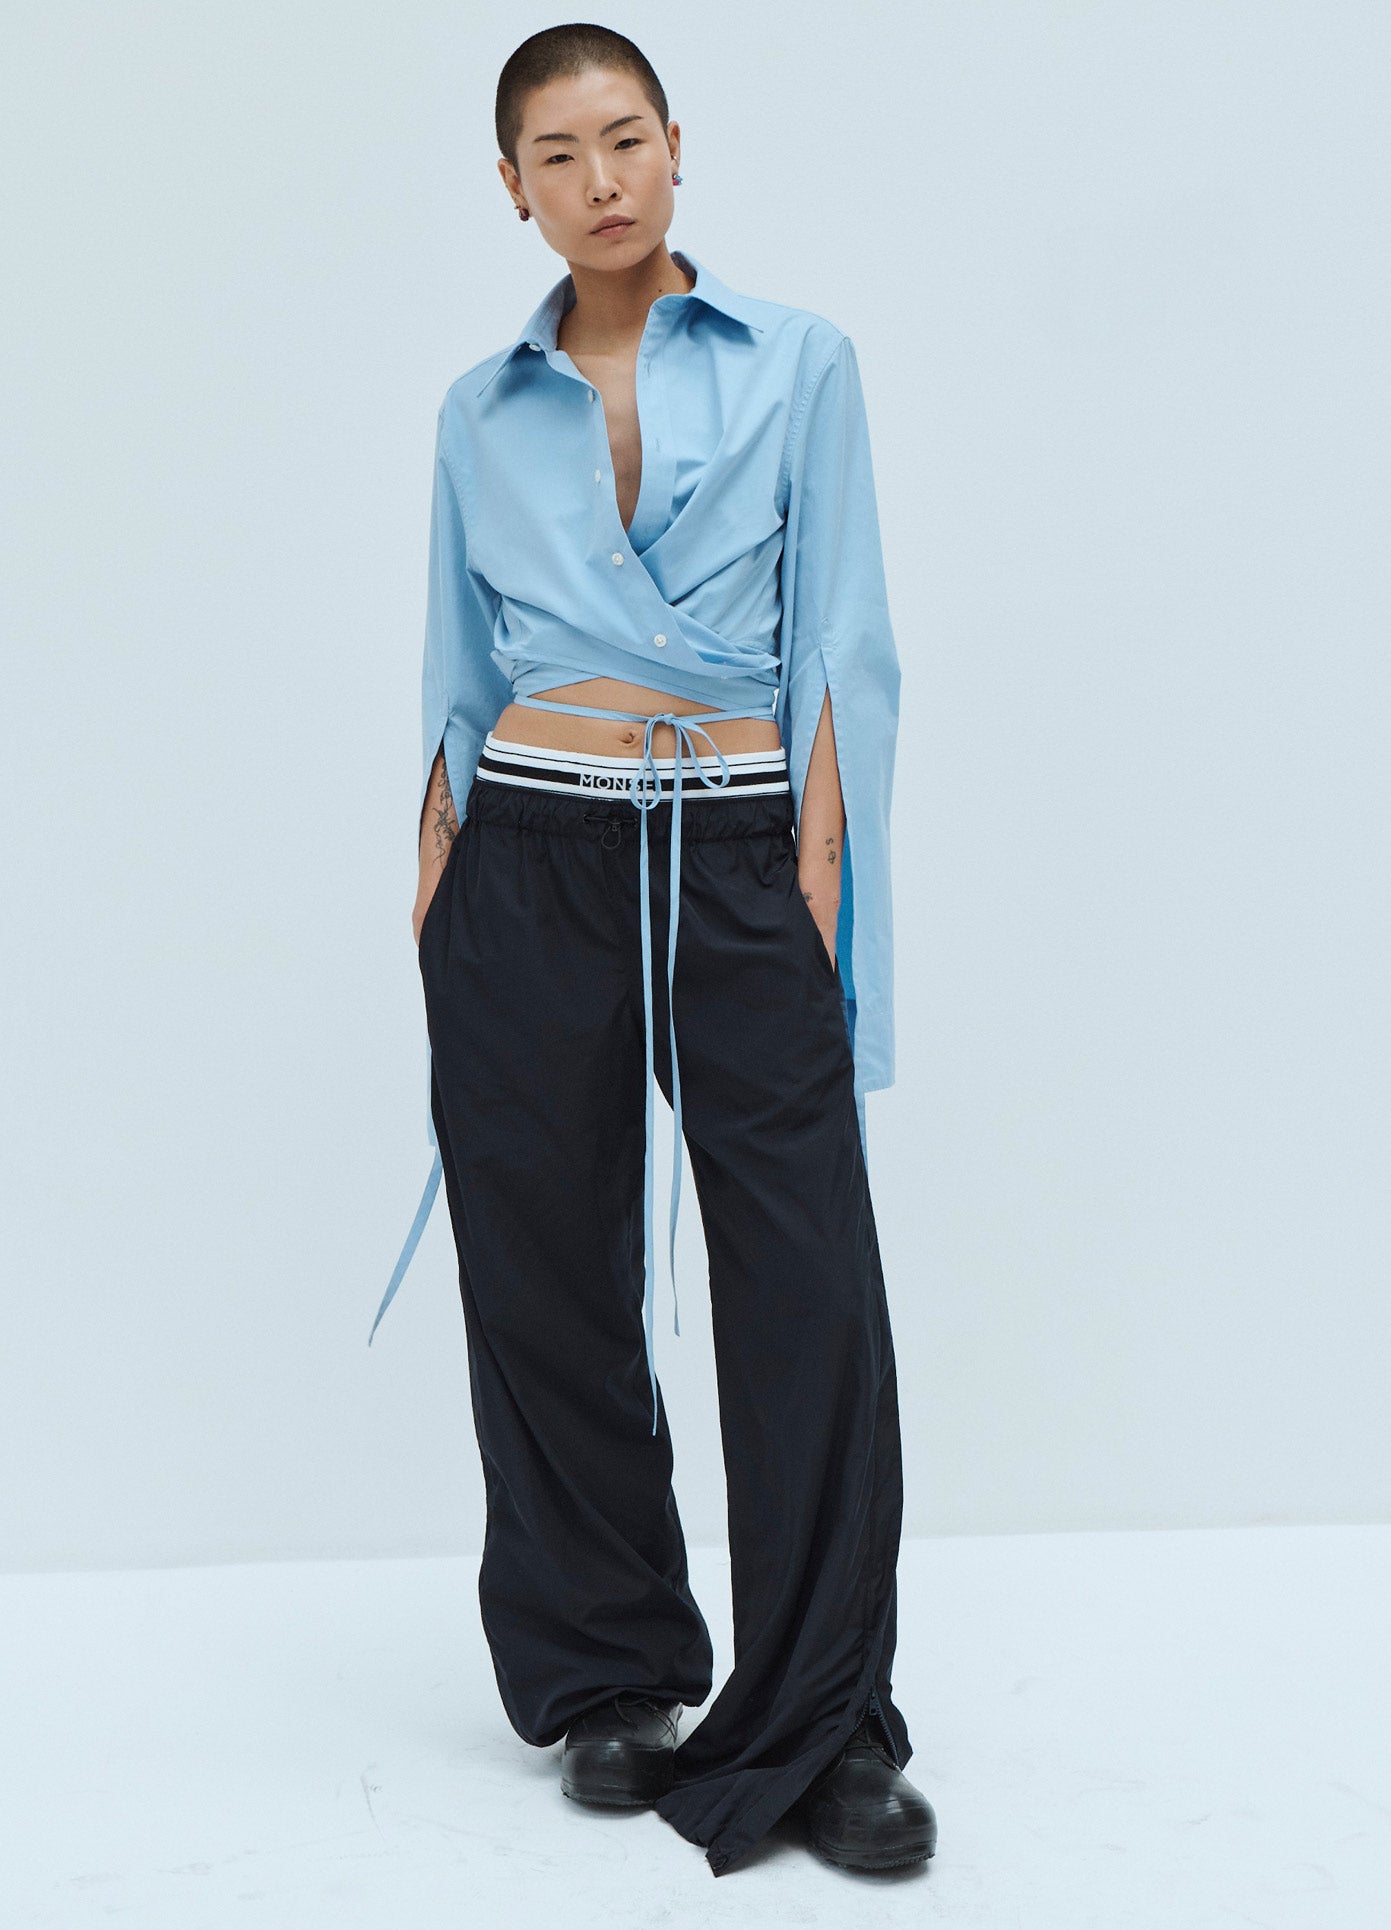 MONSE Techno Waistband Detail Parachute Pant in Black on Model Front View